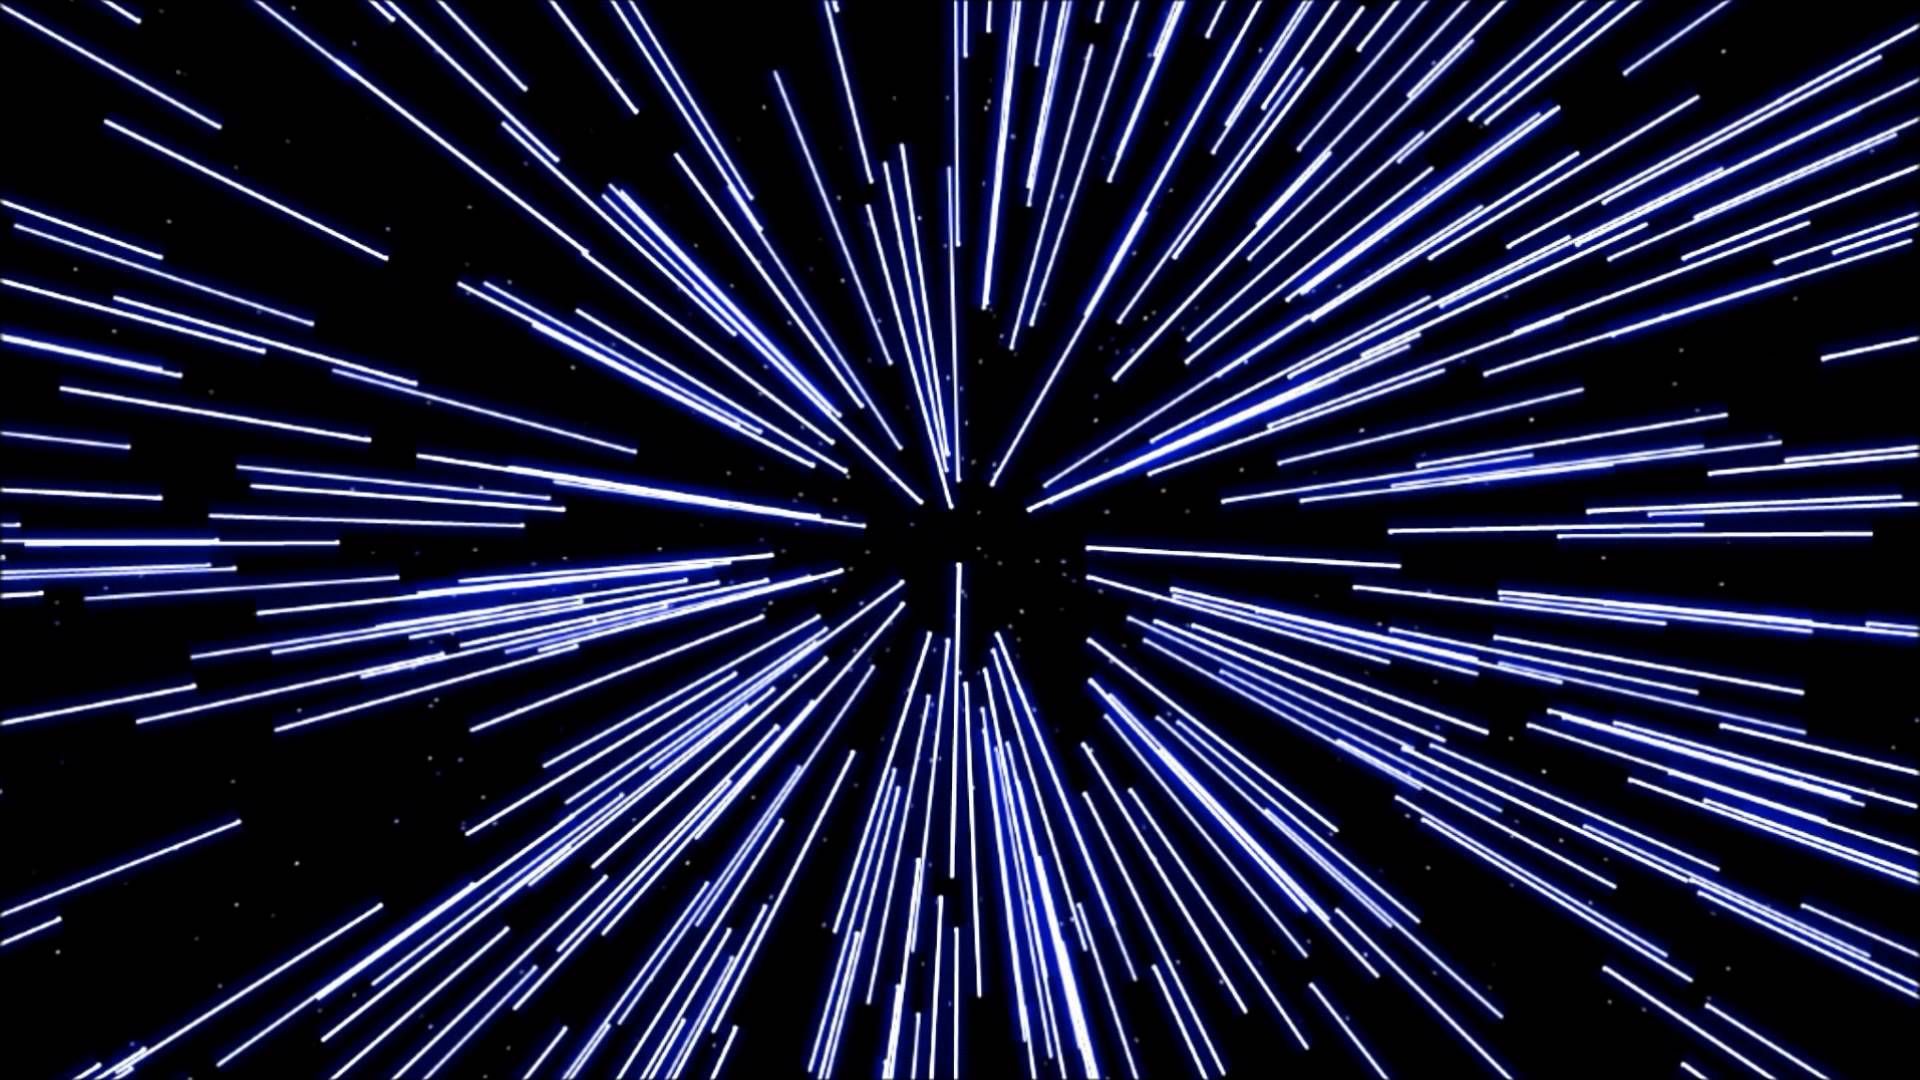 Hyperspace Wallpapers - Wallpaper Cave